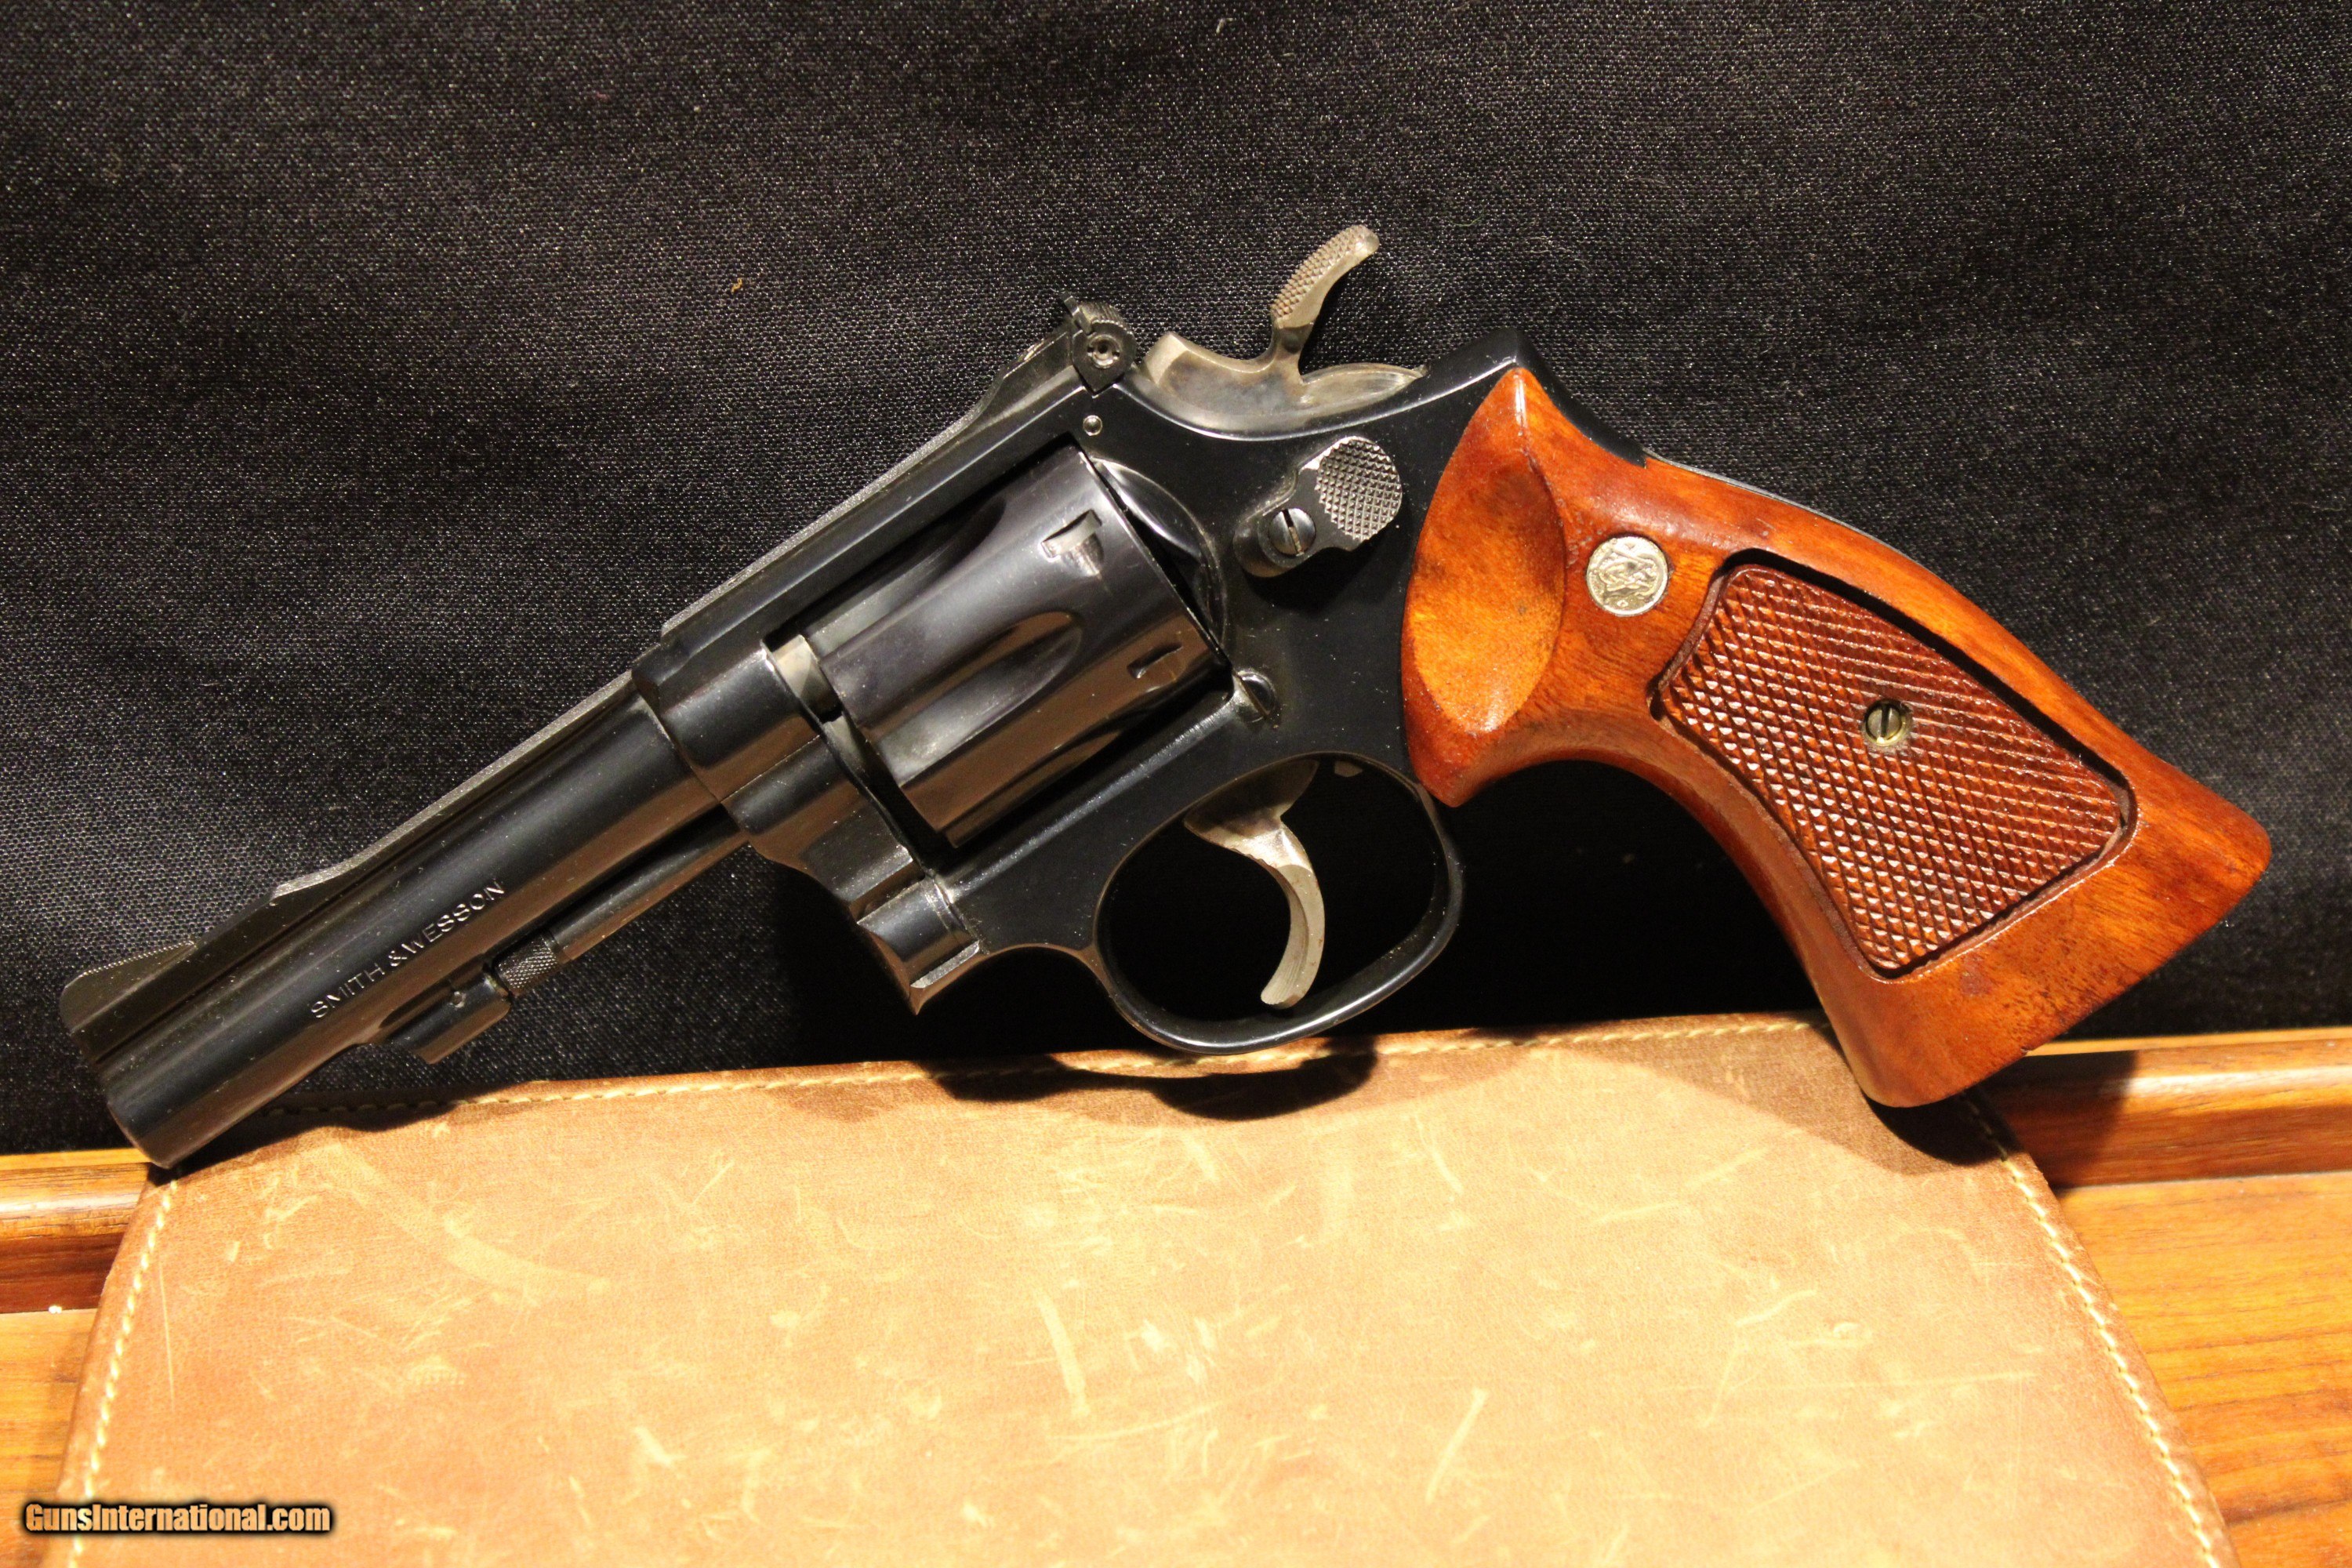 Smith-and-Wesson-Model-18-4-22LR_102536896_6722_CB46392C97D3EEC7.JPG